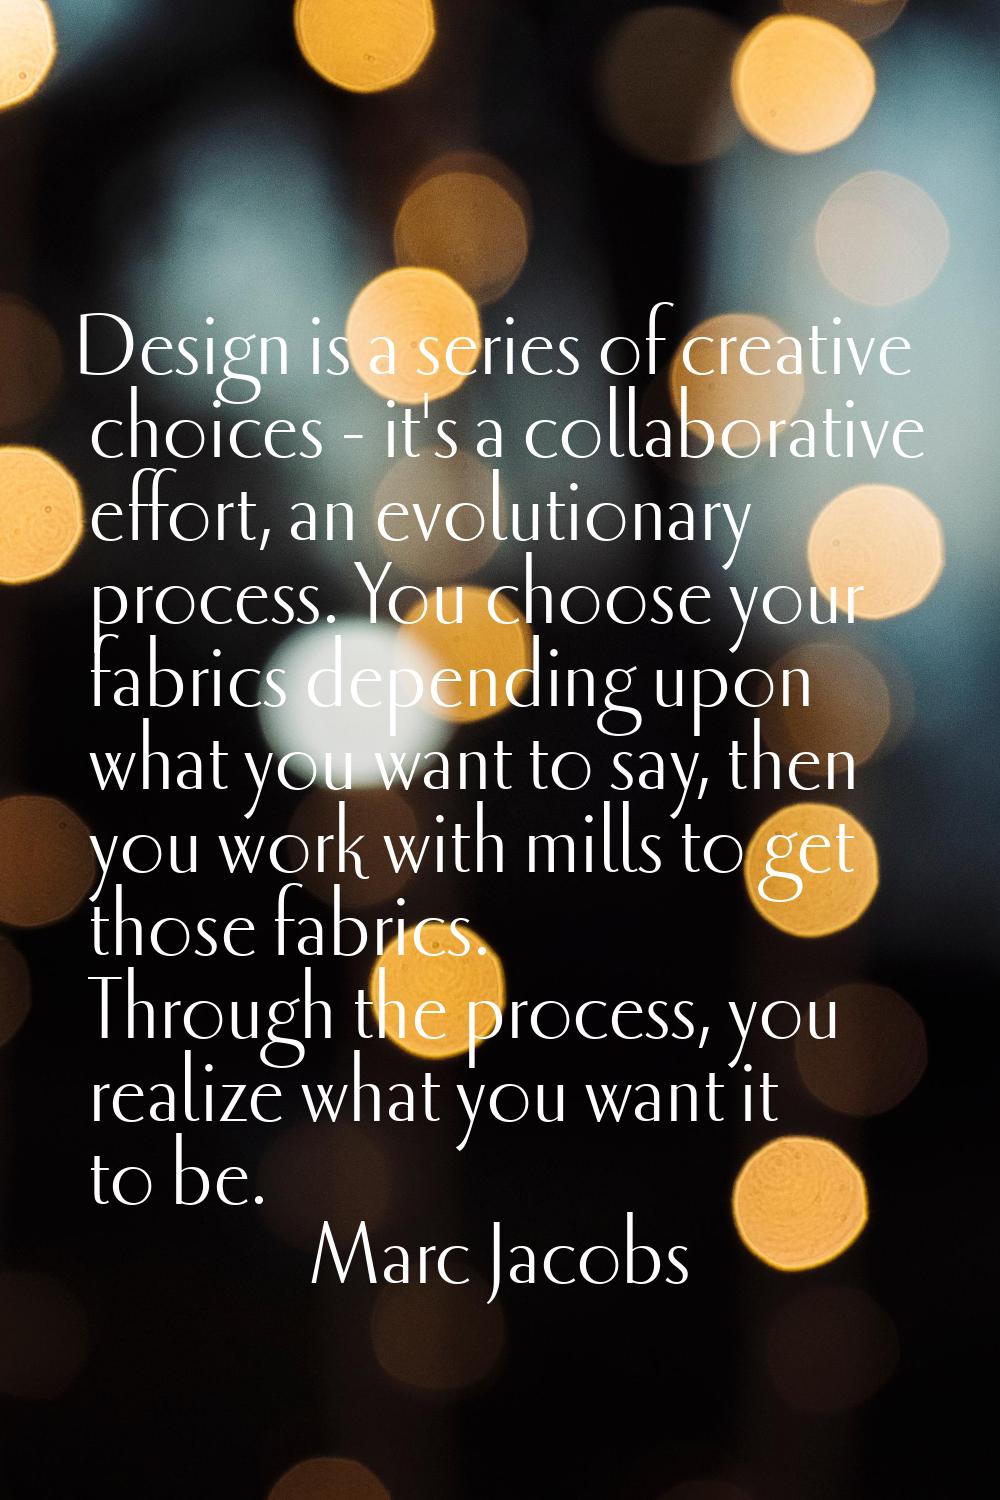 Design is a series of creative choices - it's a collaborative effort, an evolutionary process. You 